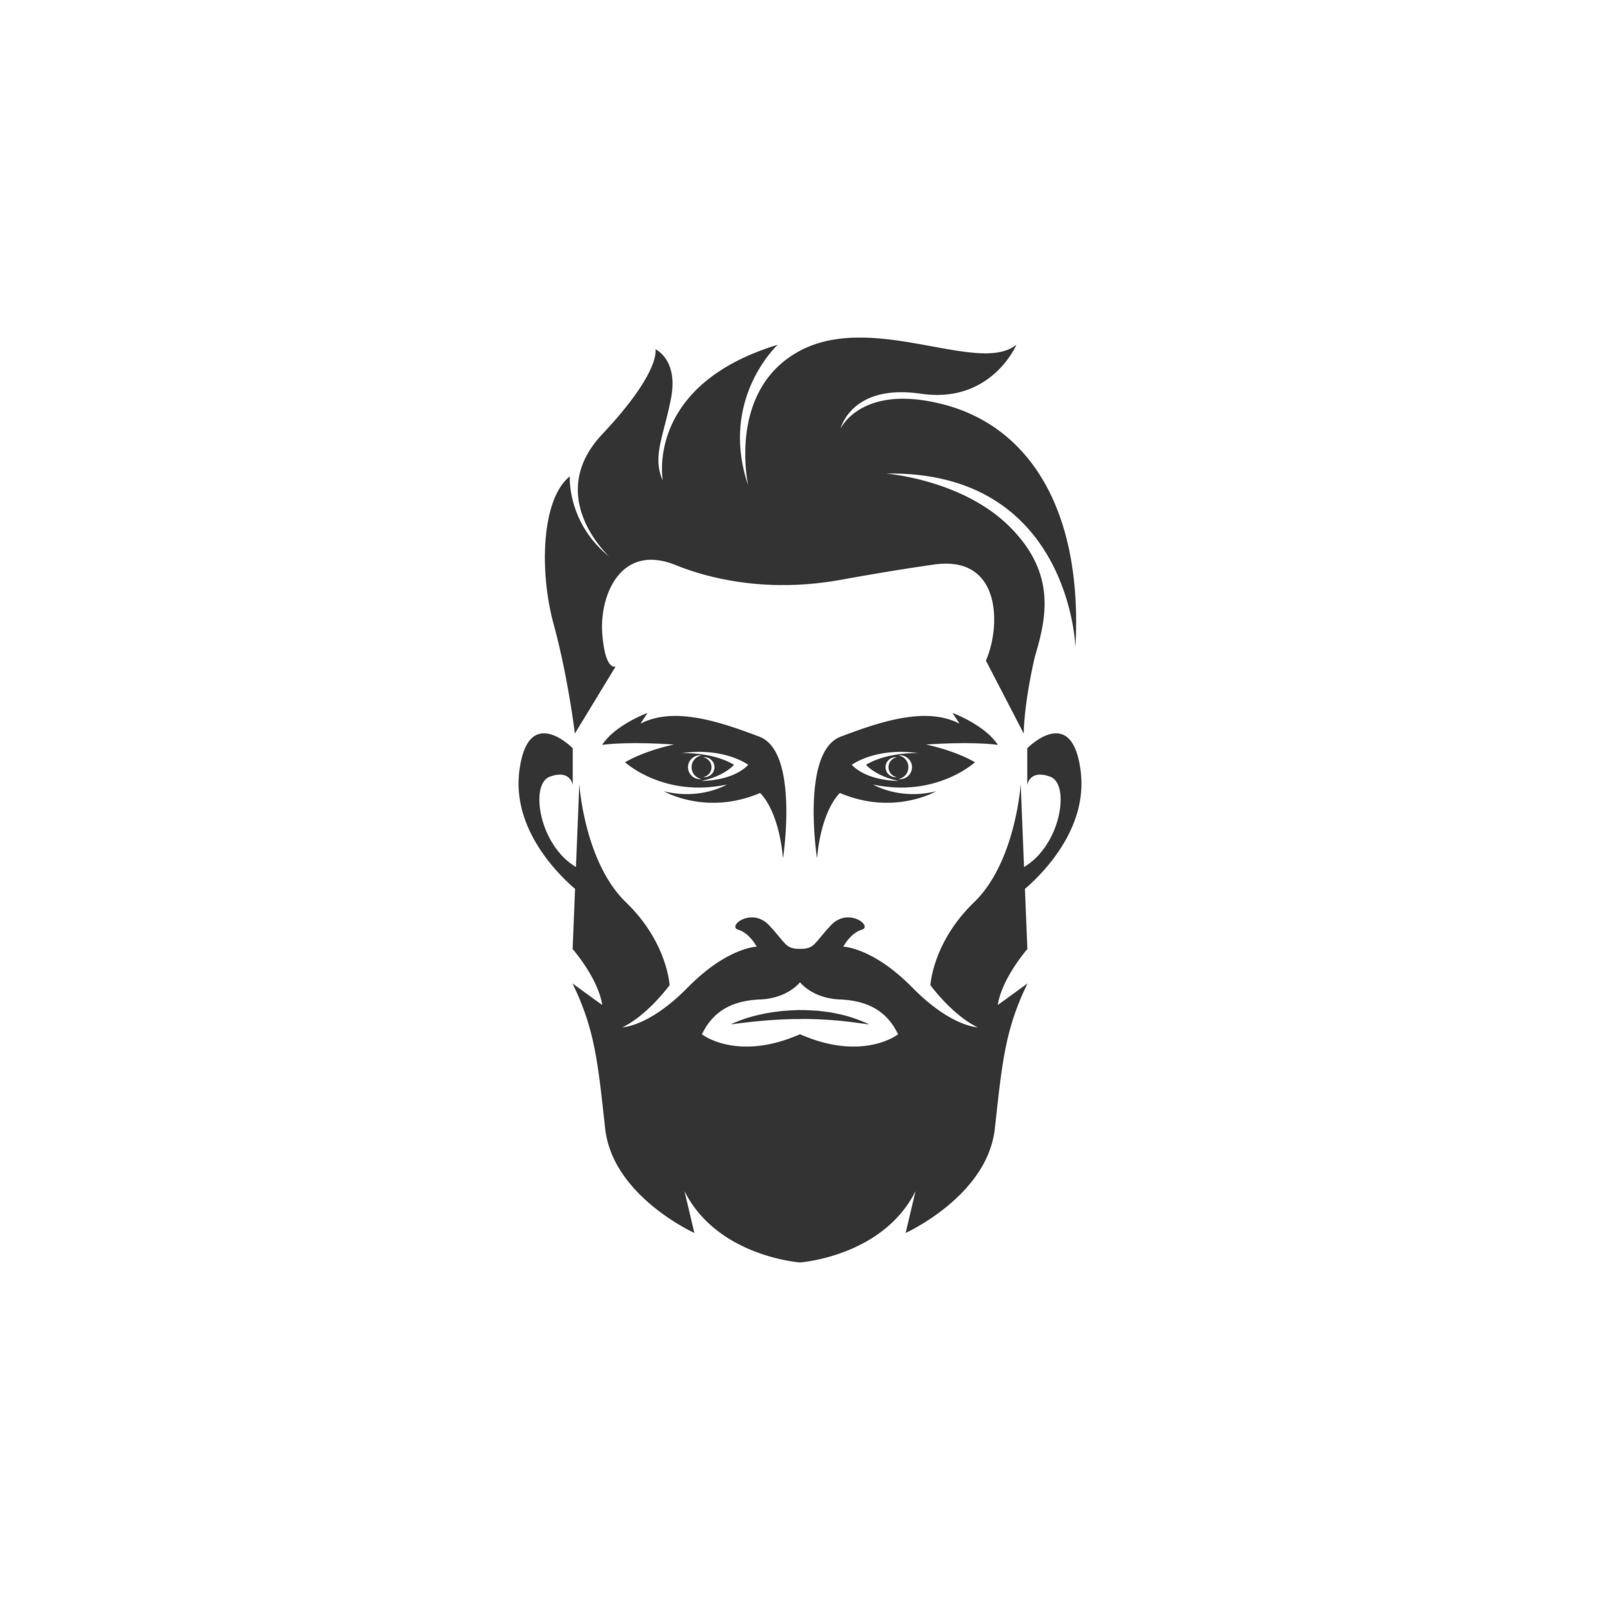 Men's hairstyle icon design illustration by bellaxbudhong3